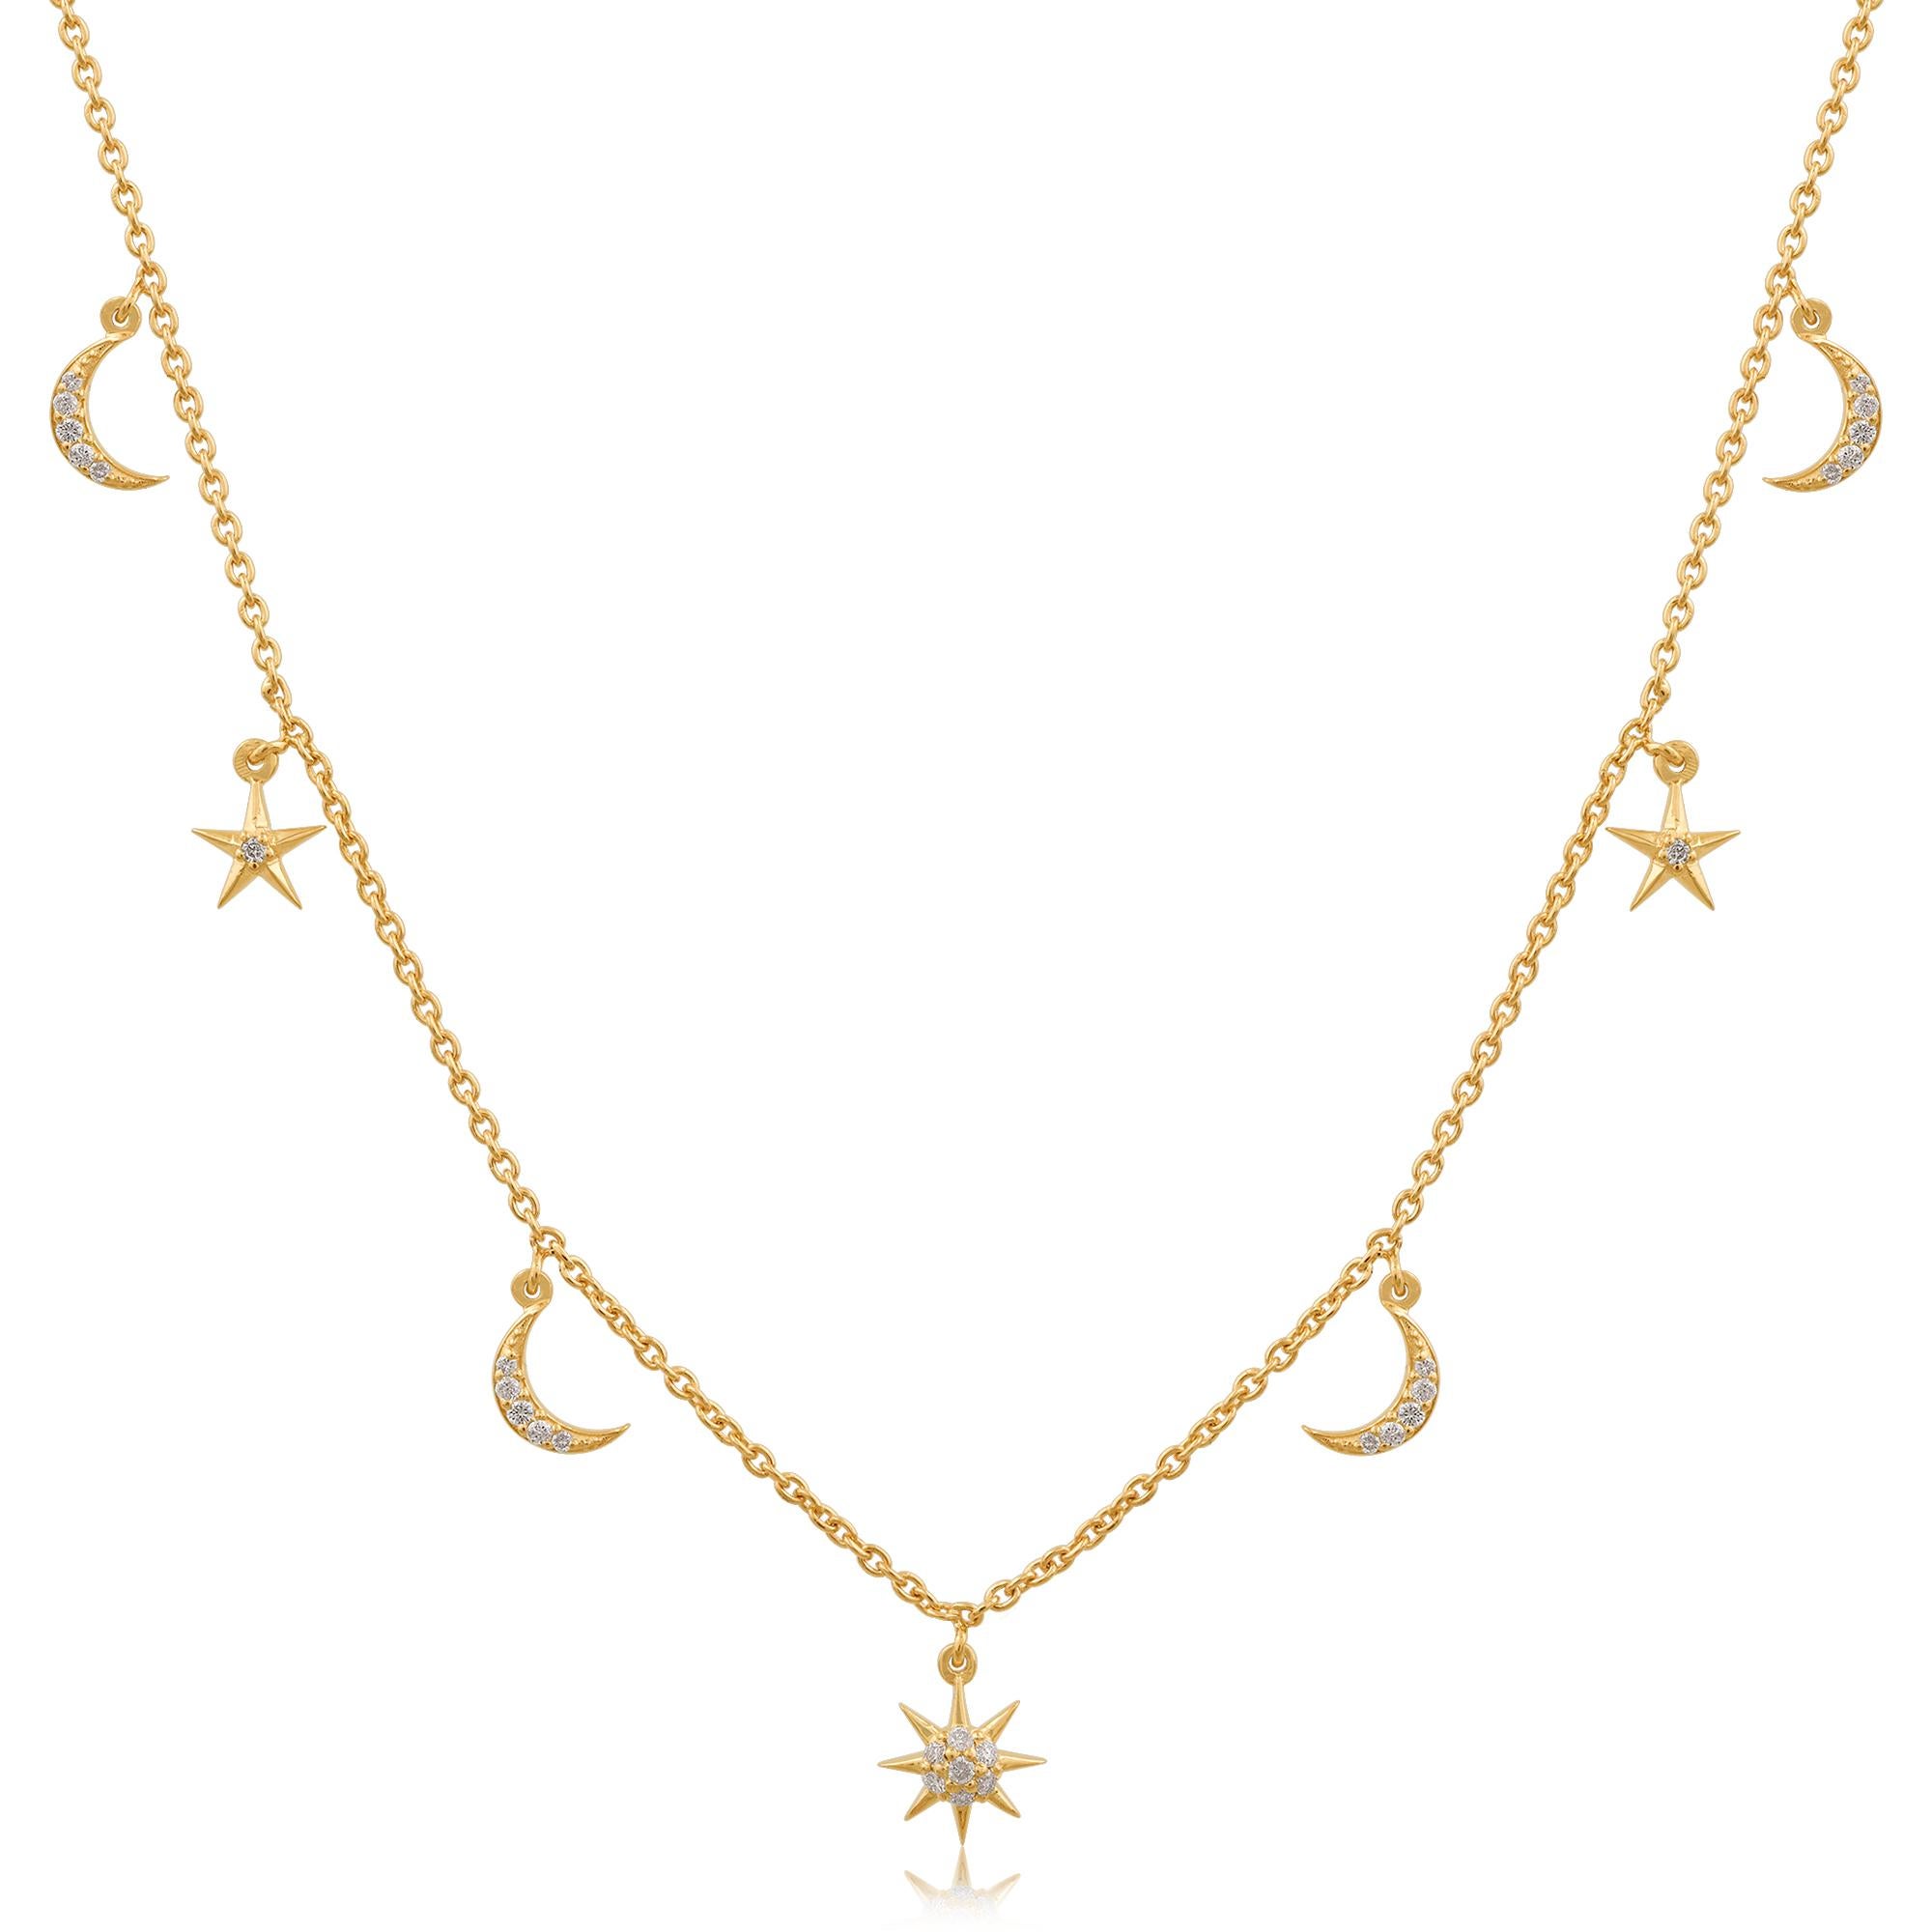 At the center of this necklace is a charming pendant featuring a delicate crescent moon and a dazzling starburst design. The moon and starburst are adorned with a total of 0.19 carats of SI clarity and HI color diamonds, carefully selected for their